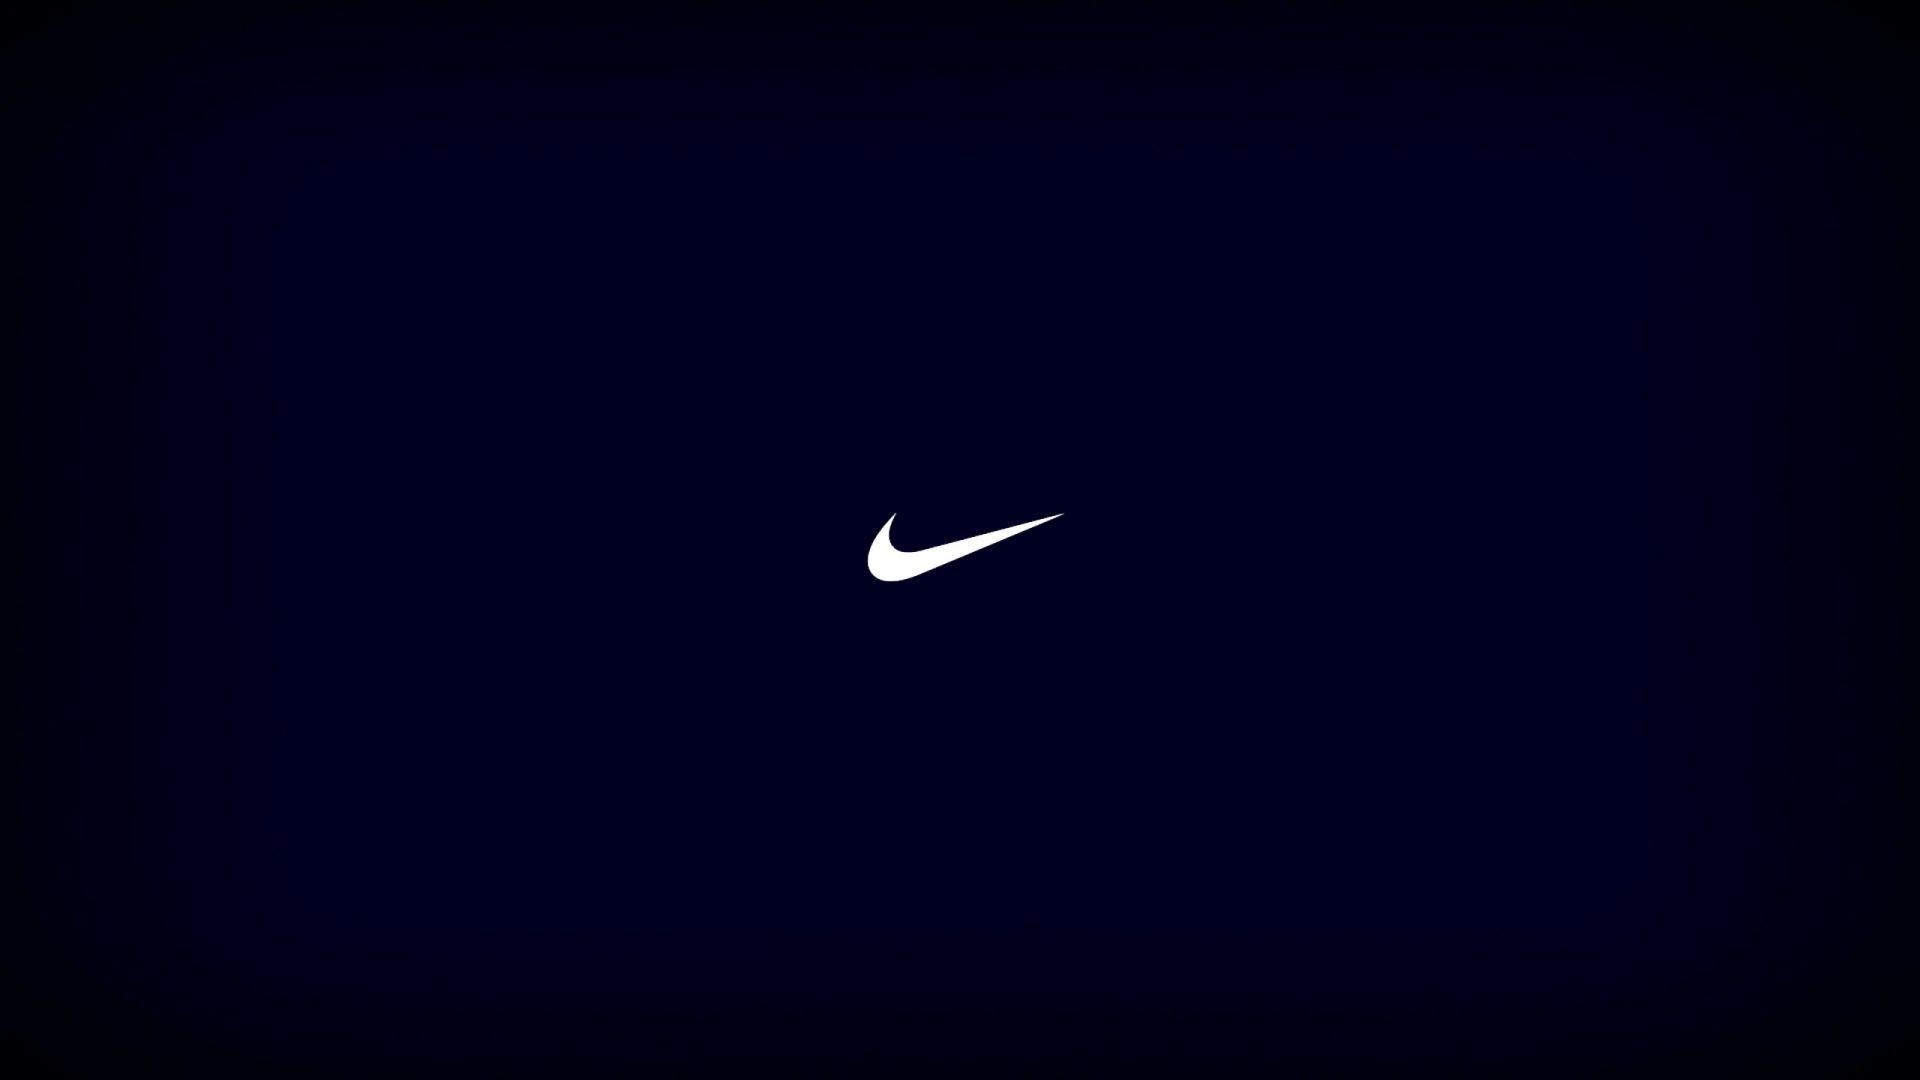 Nike Logo On The Blue Backgrounds Wallpapers Des Wallpapers